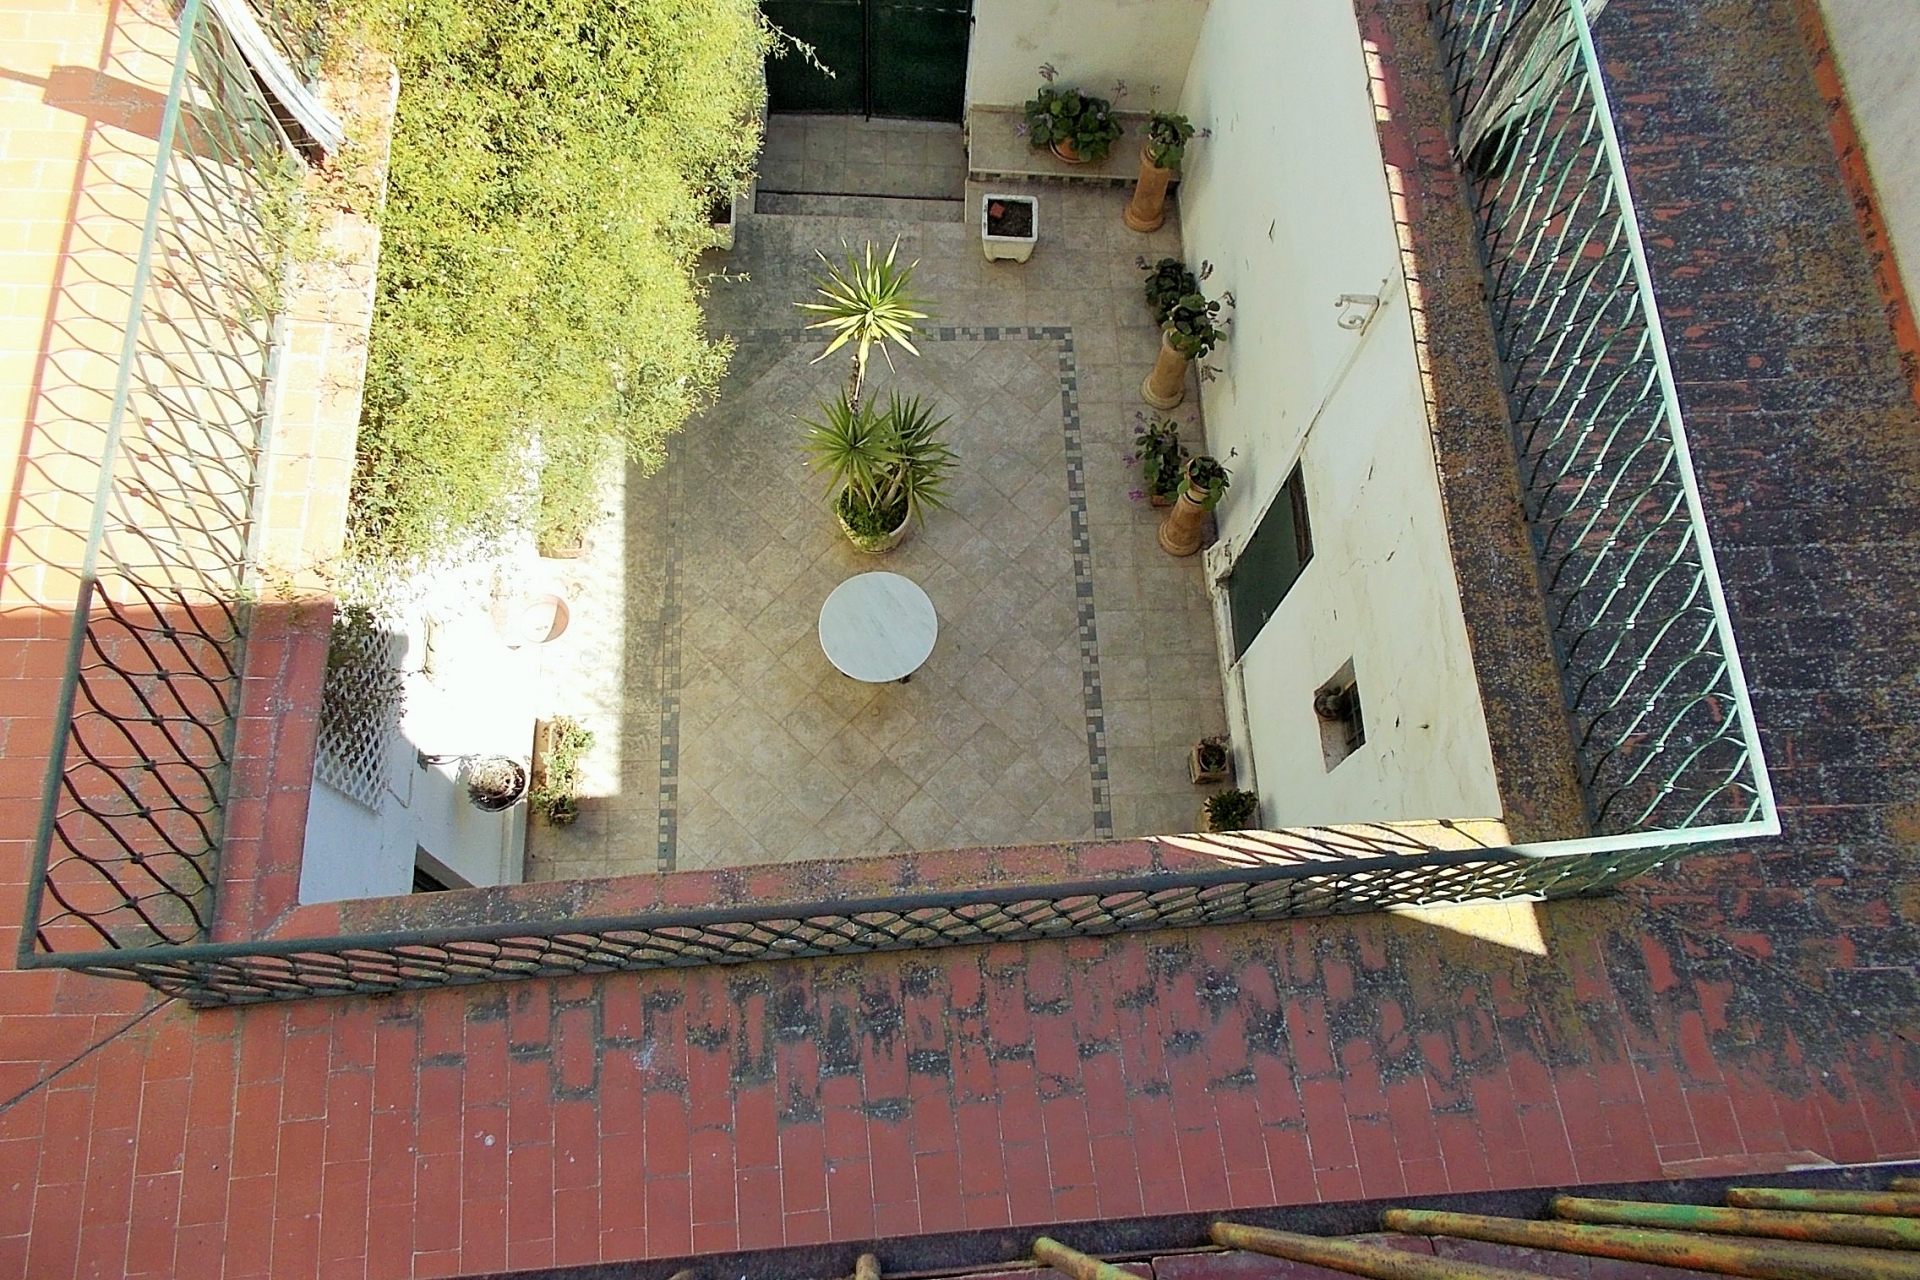 Archived - Townhouse for sale - Caudete